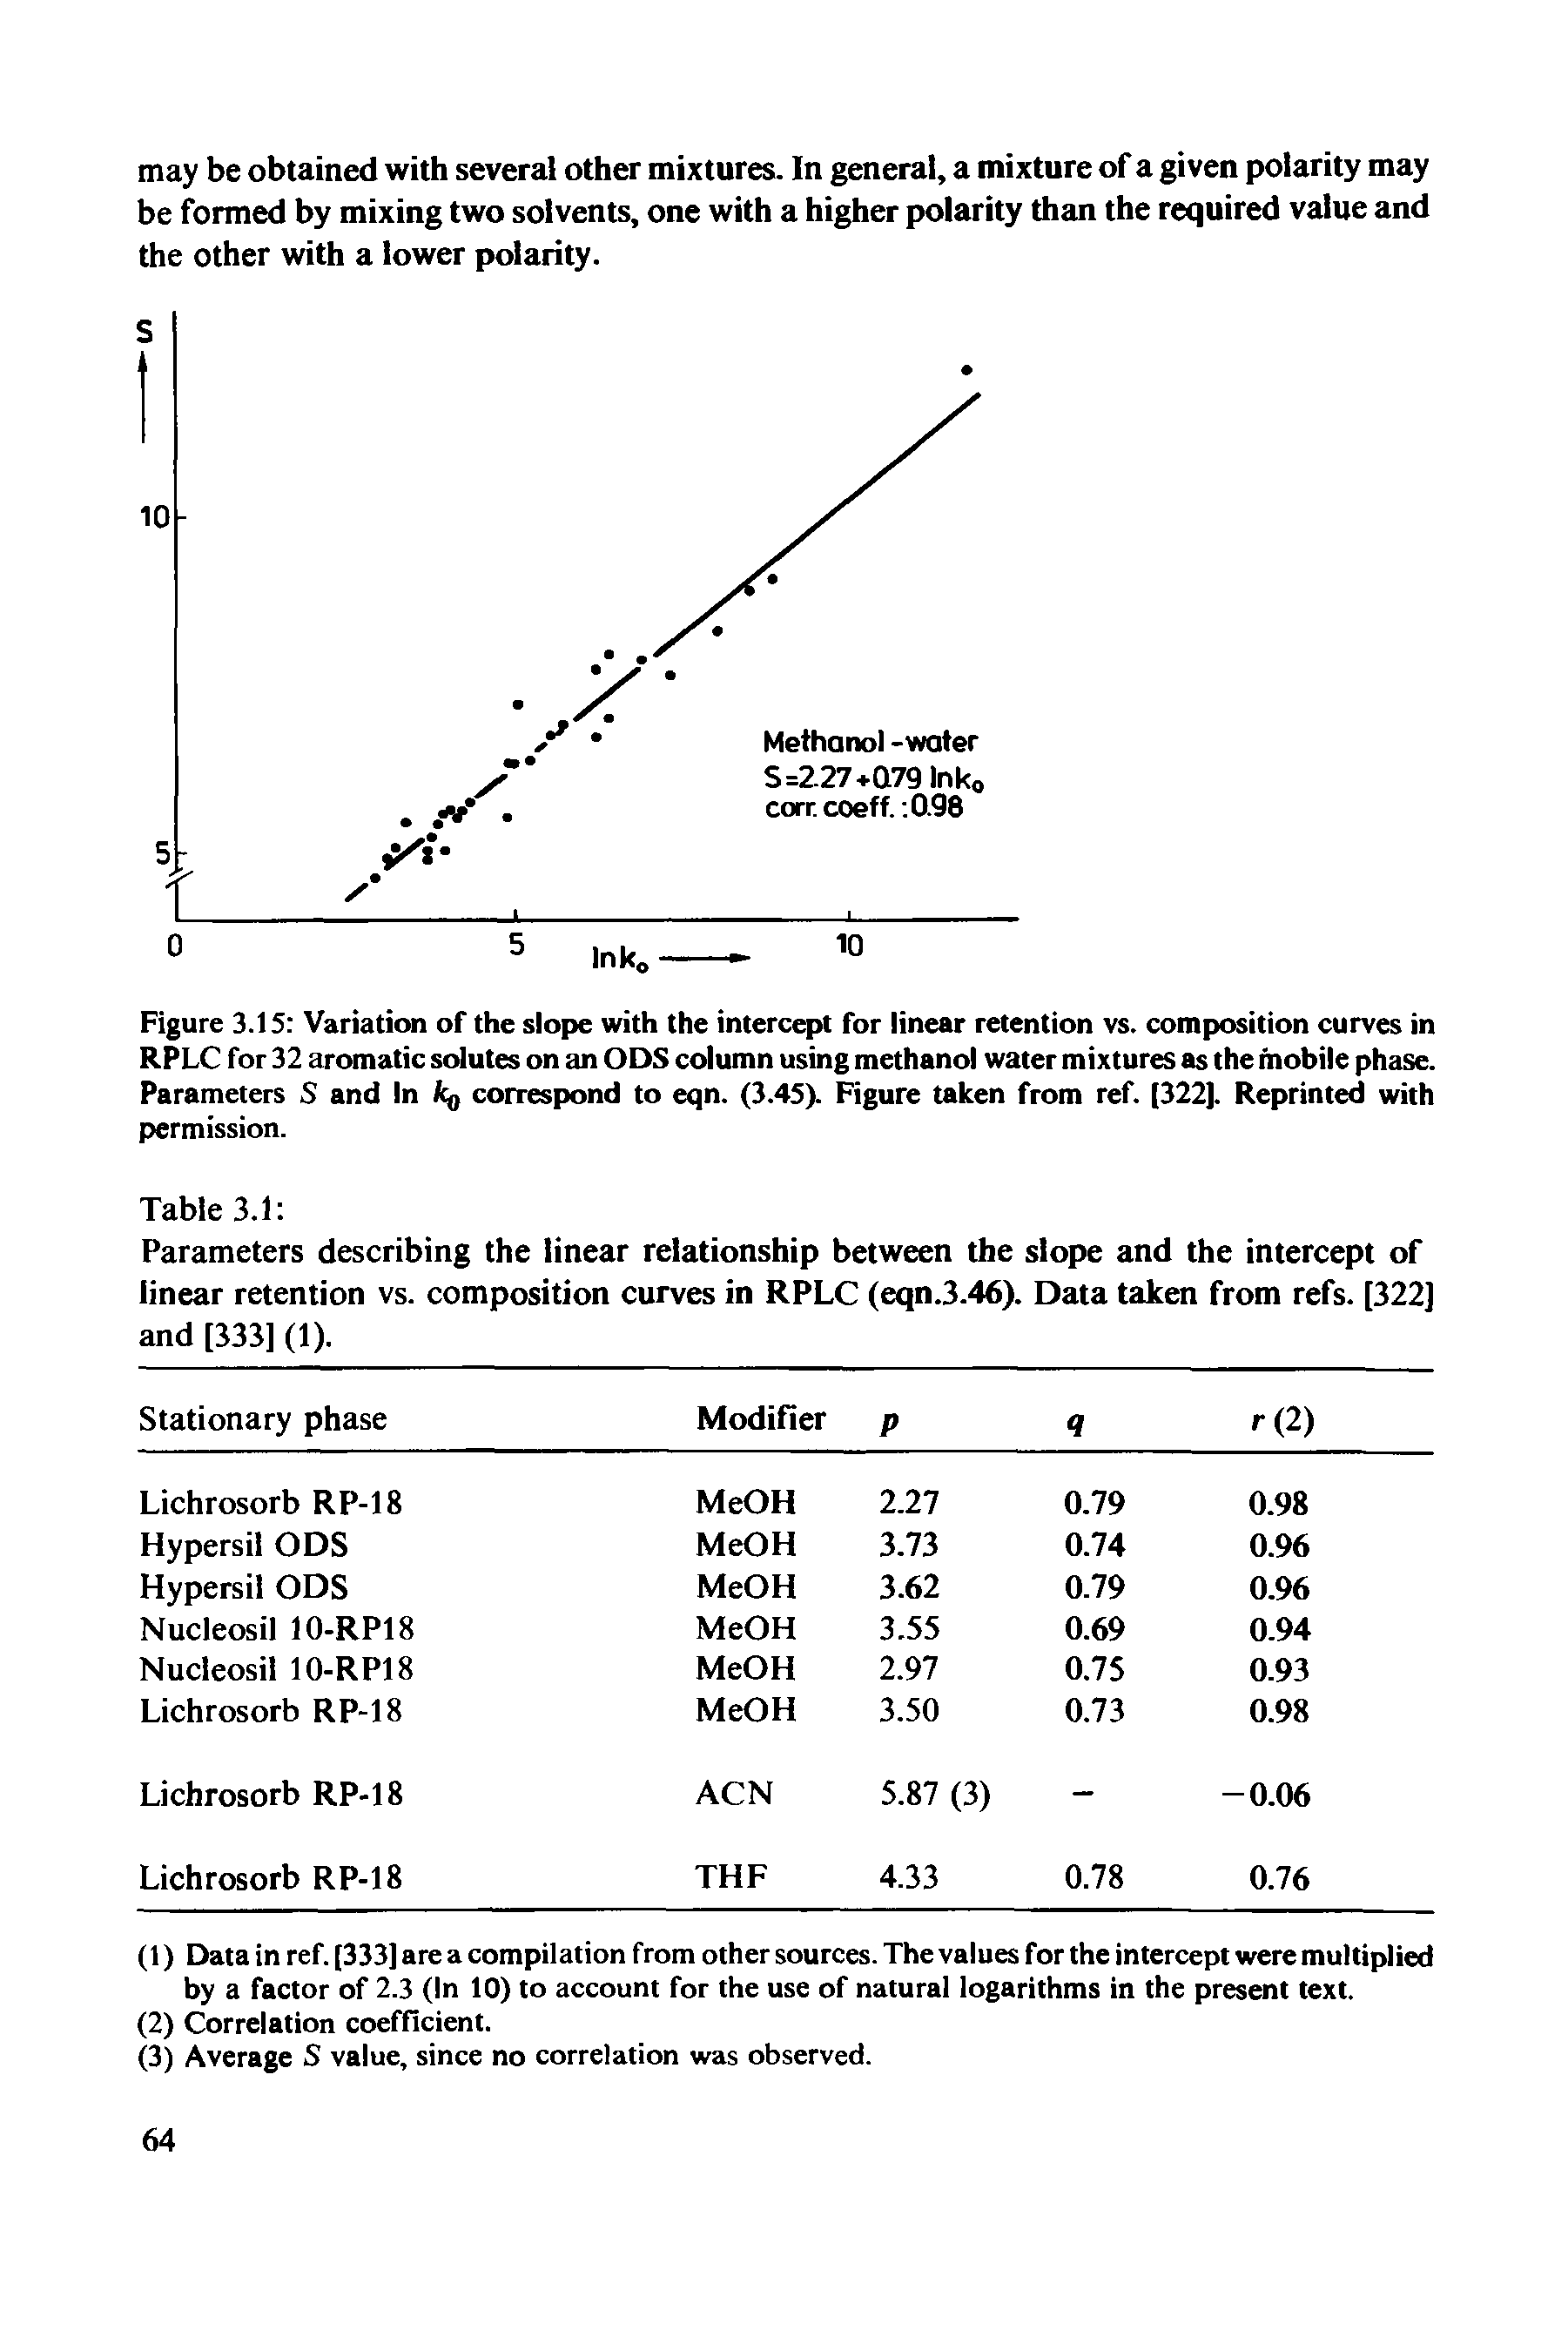 Figure 3.15 Variation of the slope with the intercept for linear retention vs. composition curves in RPLC for 32 aromatic solutes on an ODS column using methanol water mixtures as the mobile phase. Parameters S and In fcg correspond to eqn. (3.45). Figure taken from ref. [322]. Reprinted with...